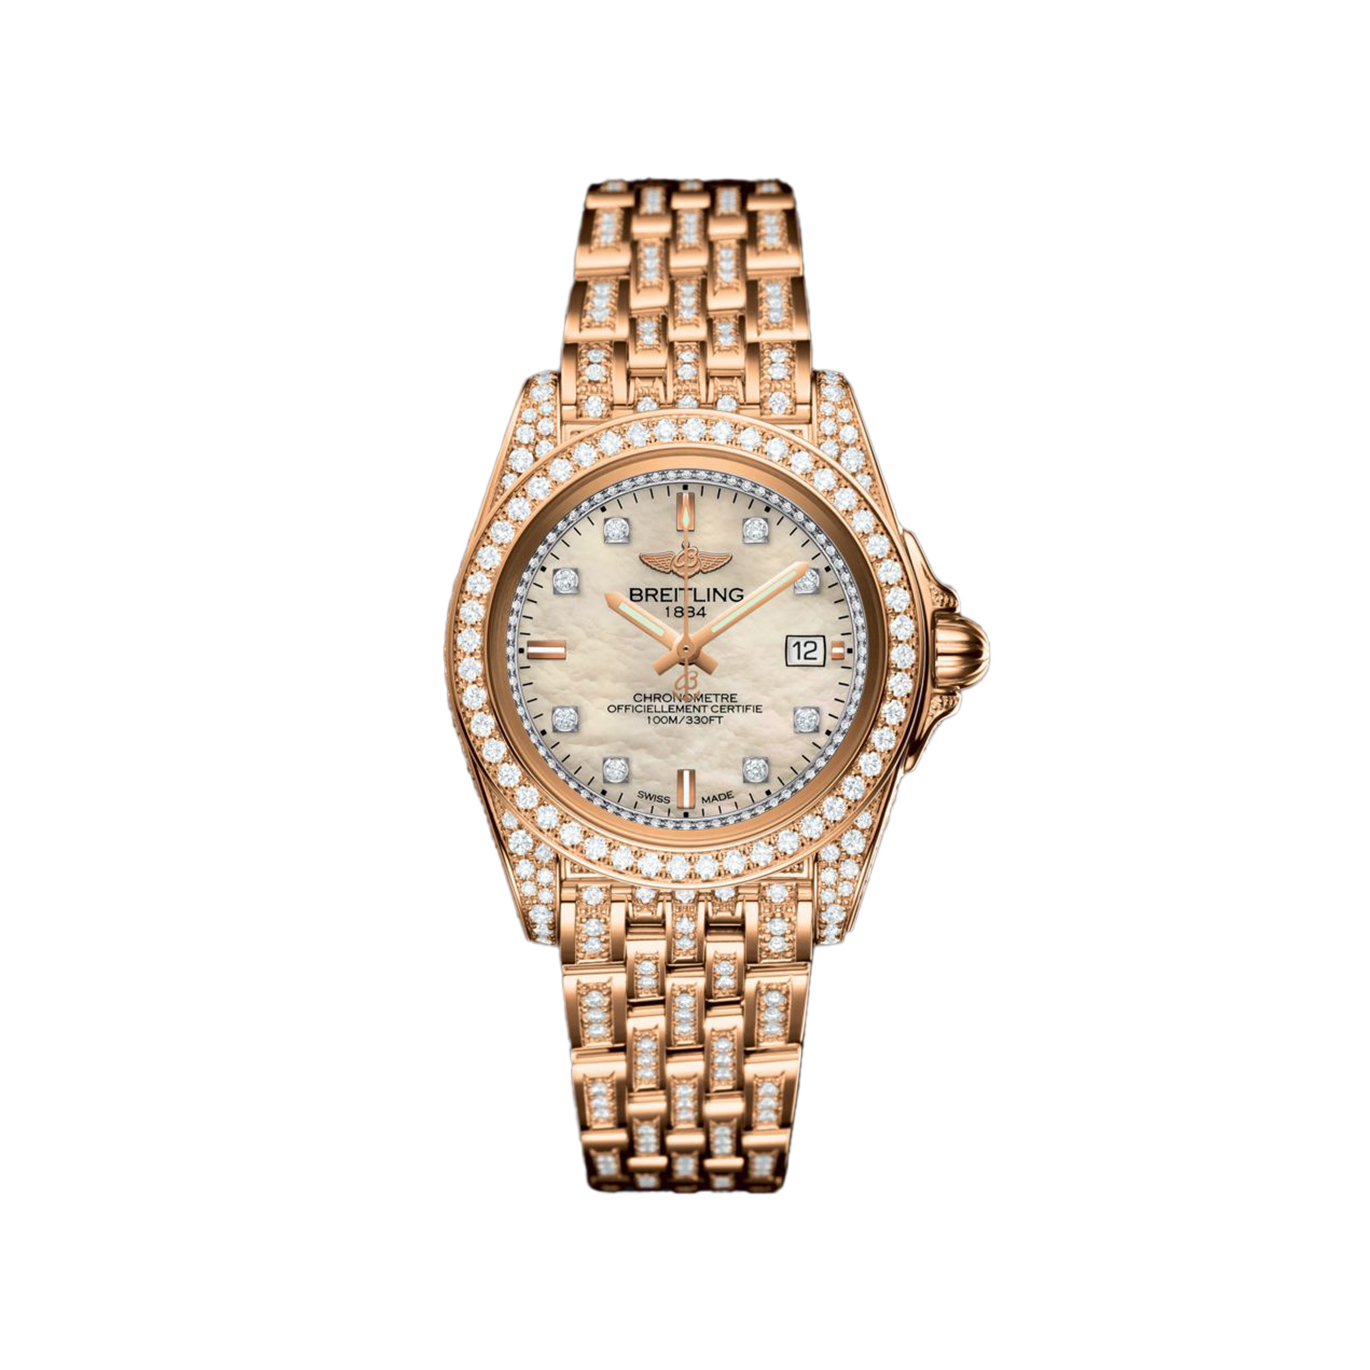 The 18k rose gold fake watches have white dials.